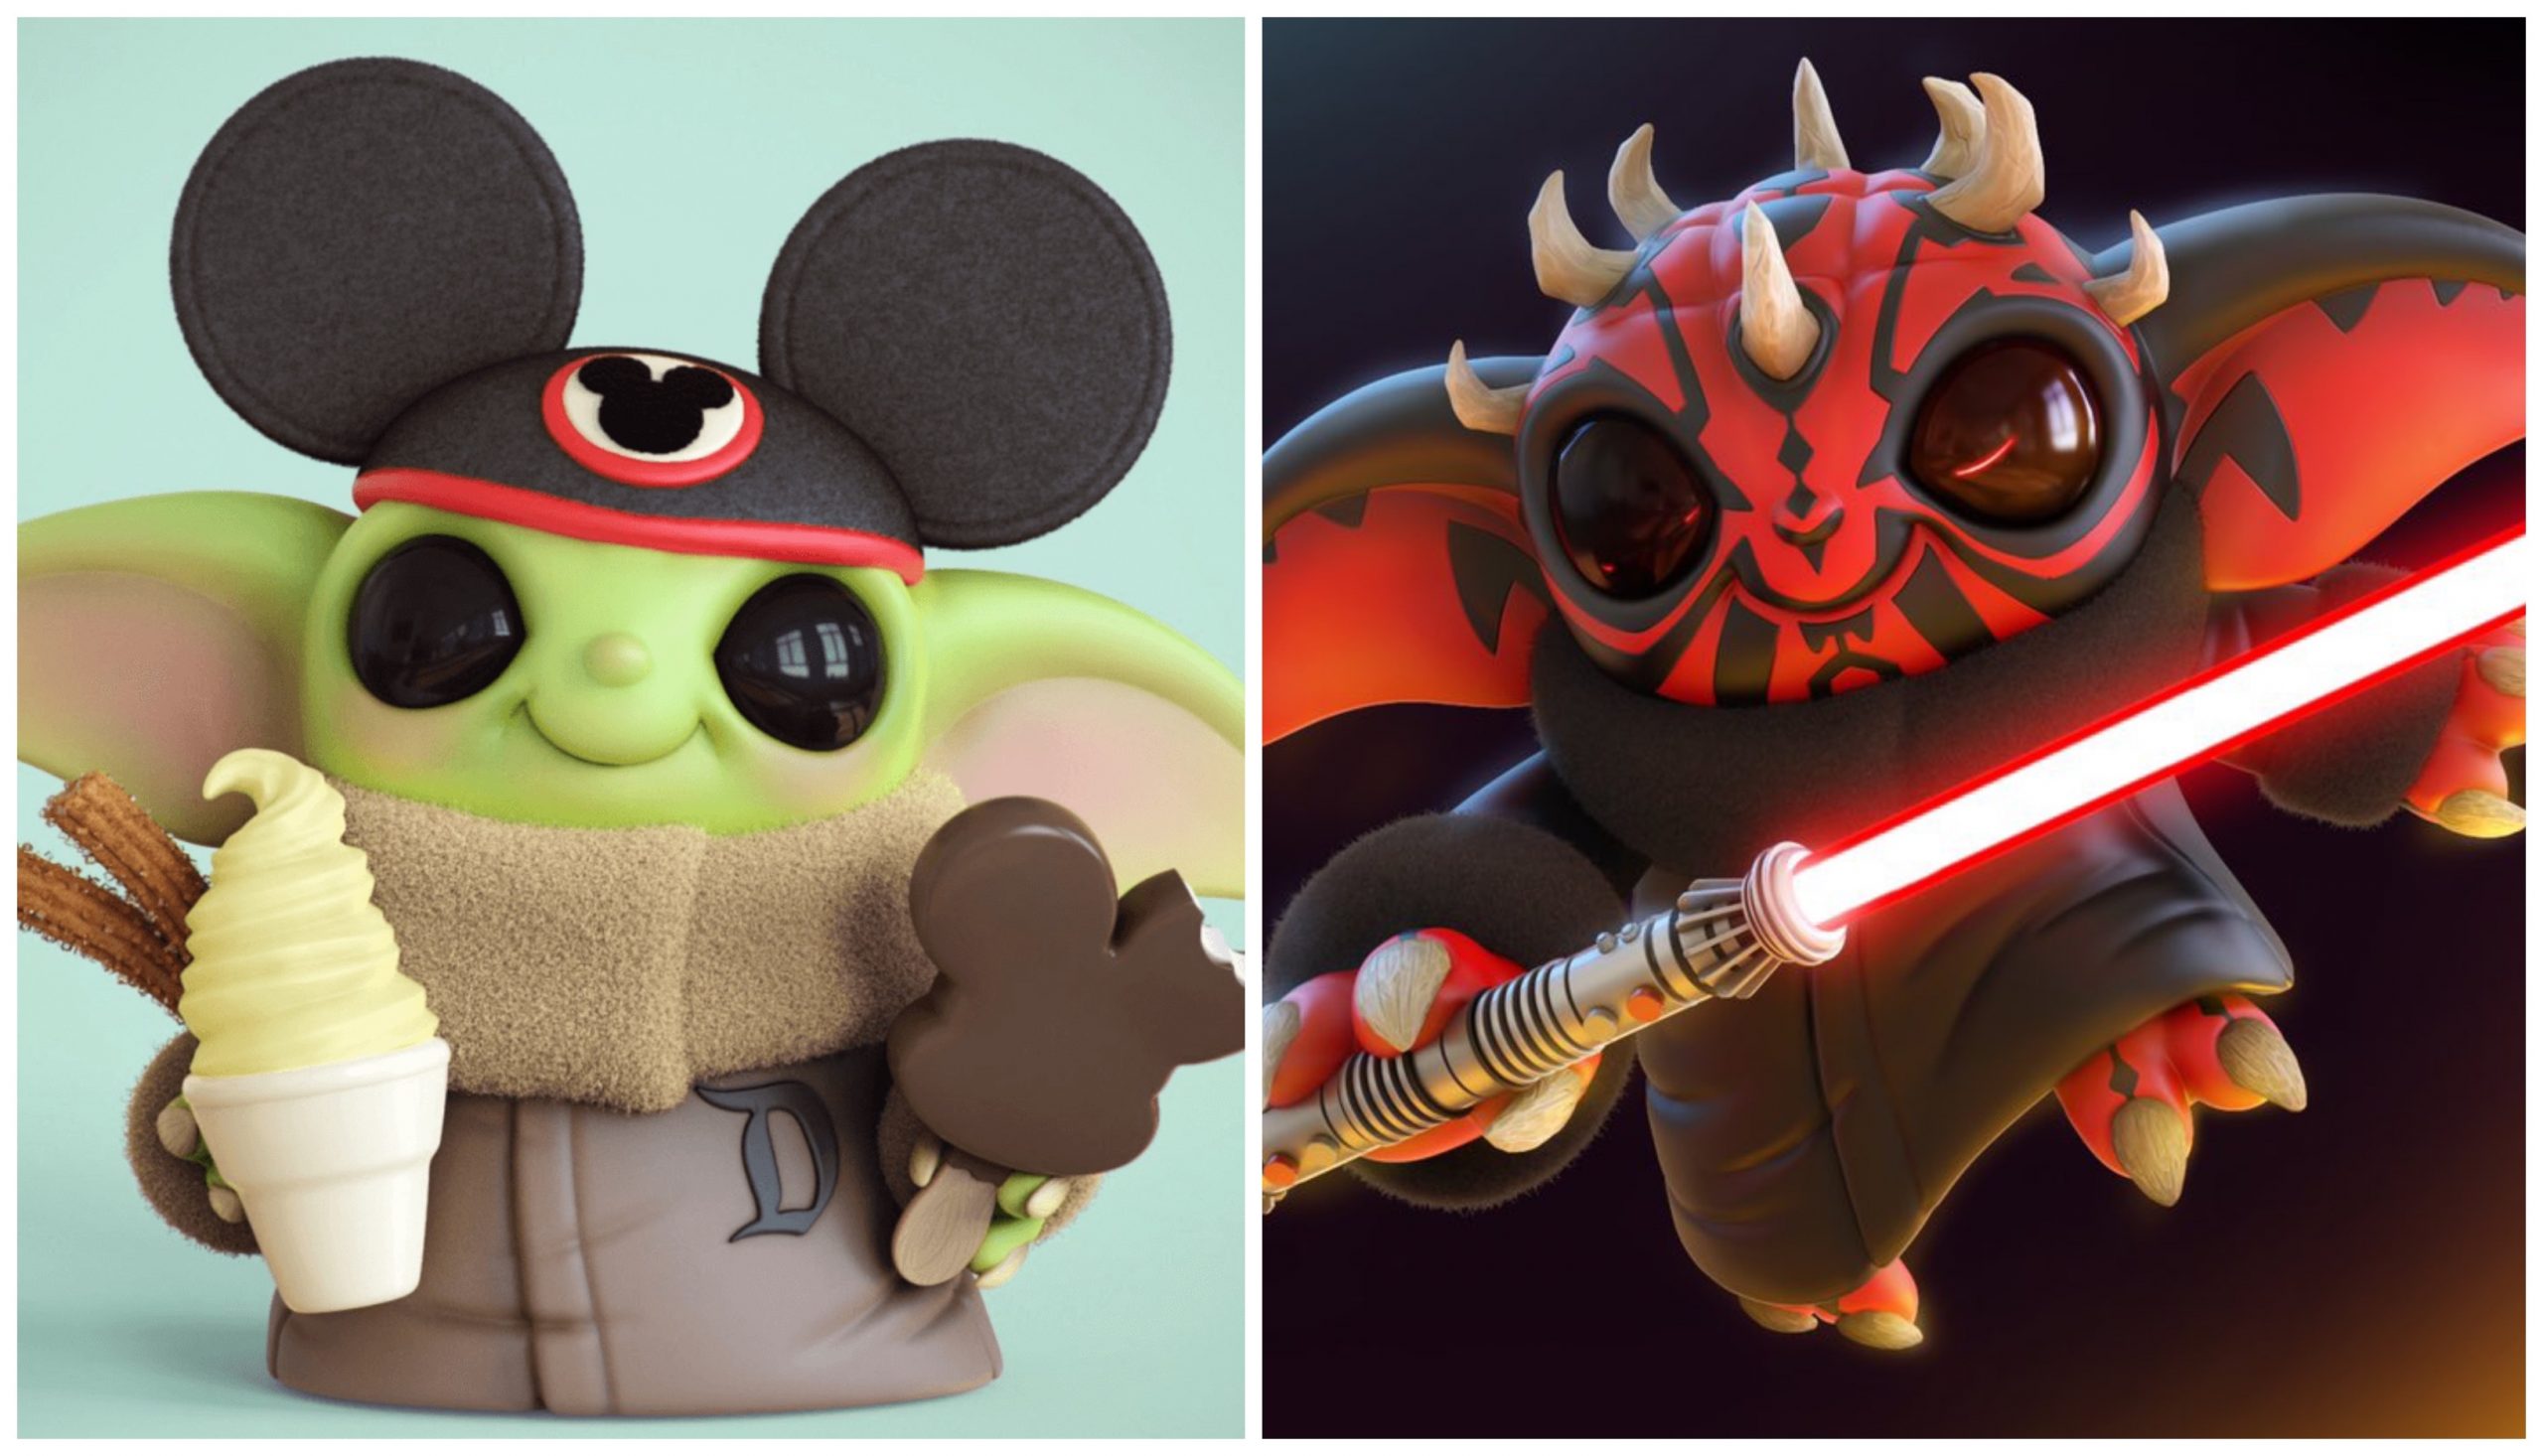 Artist Re-Creates Star Wars and Disney Animated Characters With a Twist